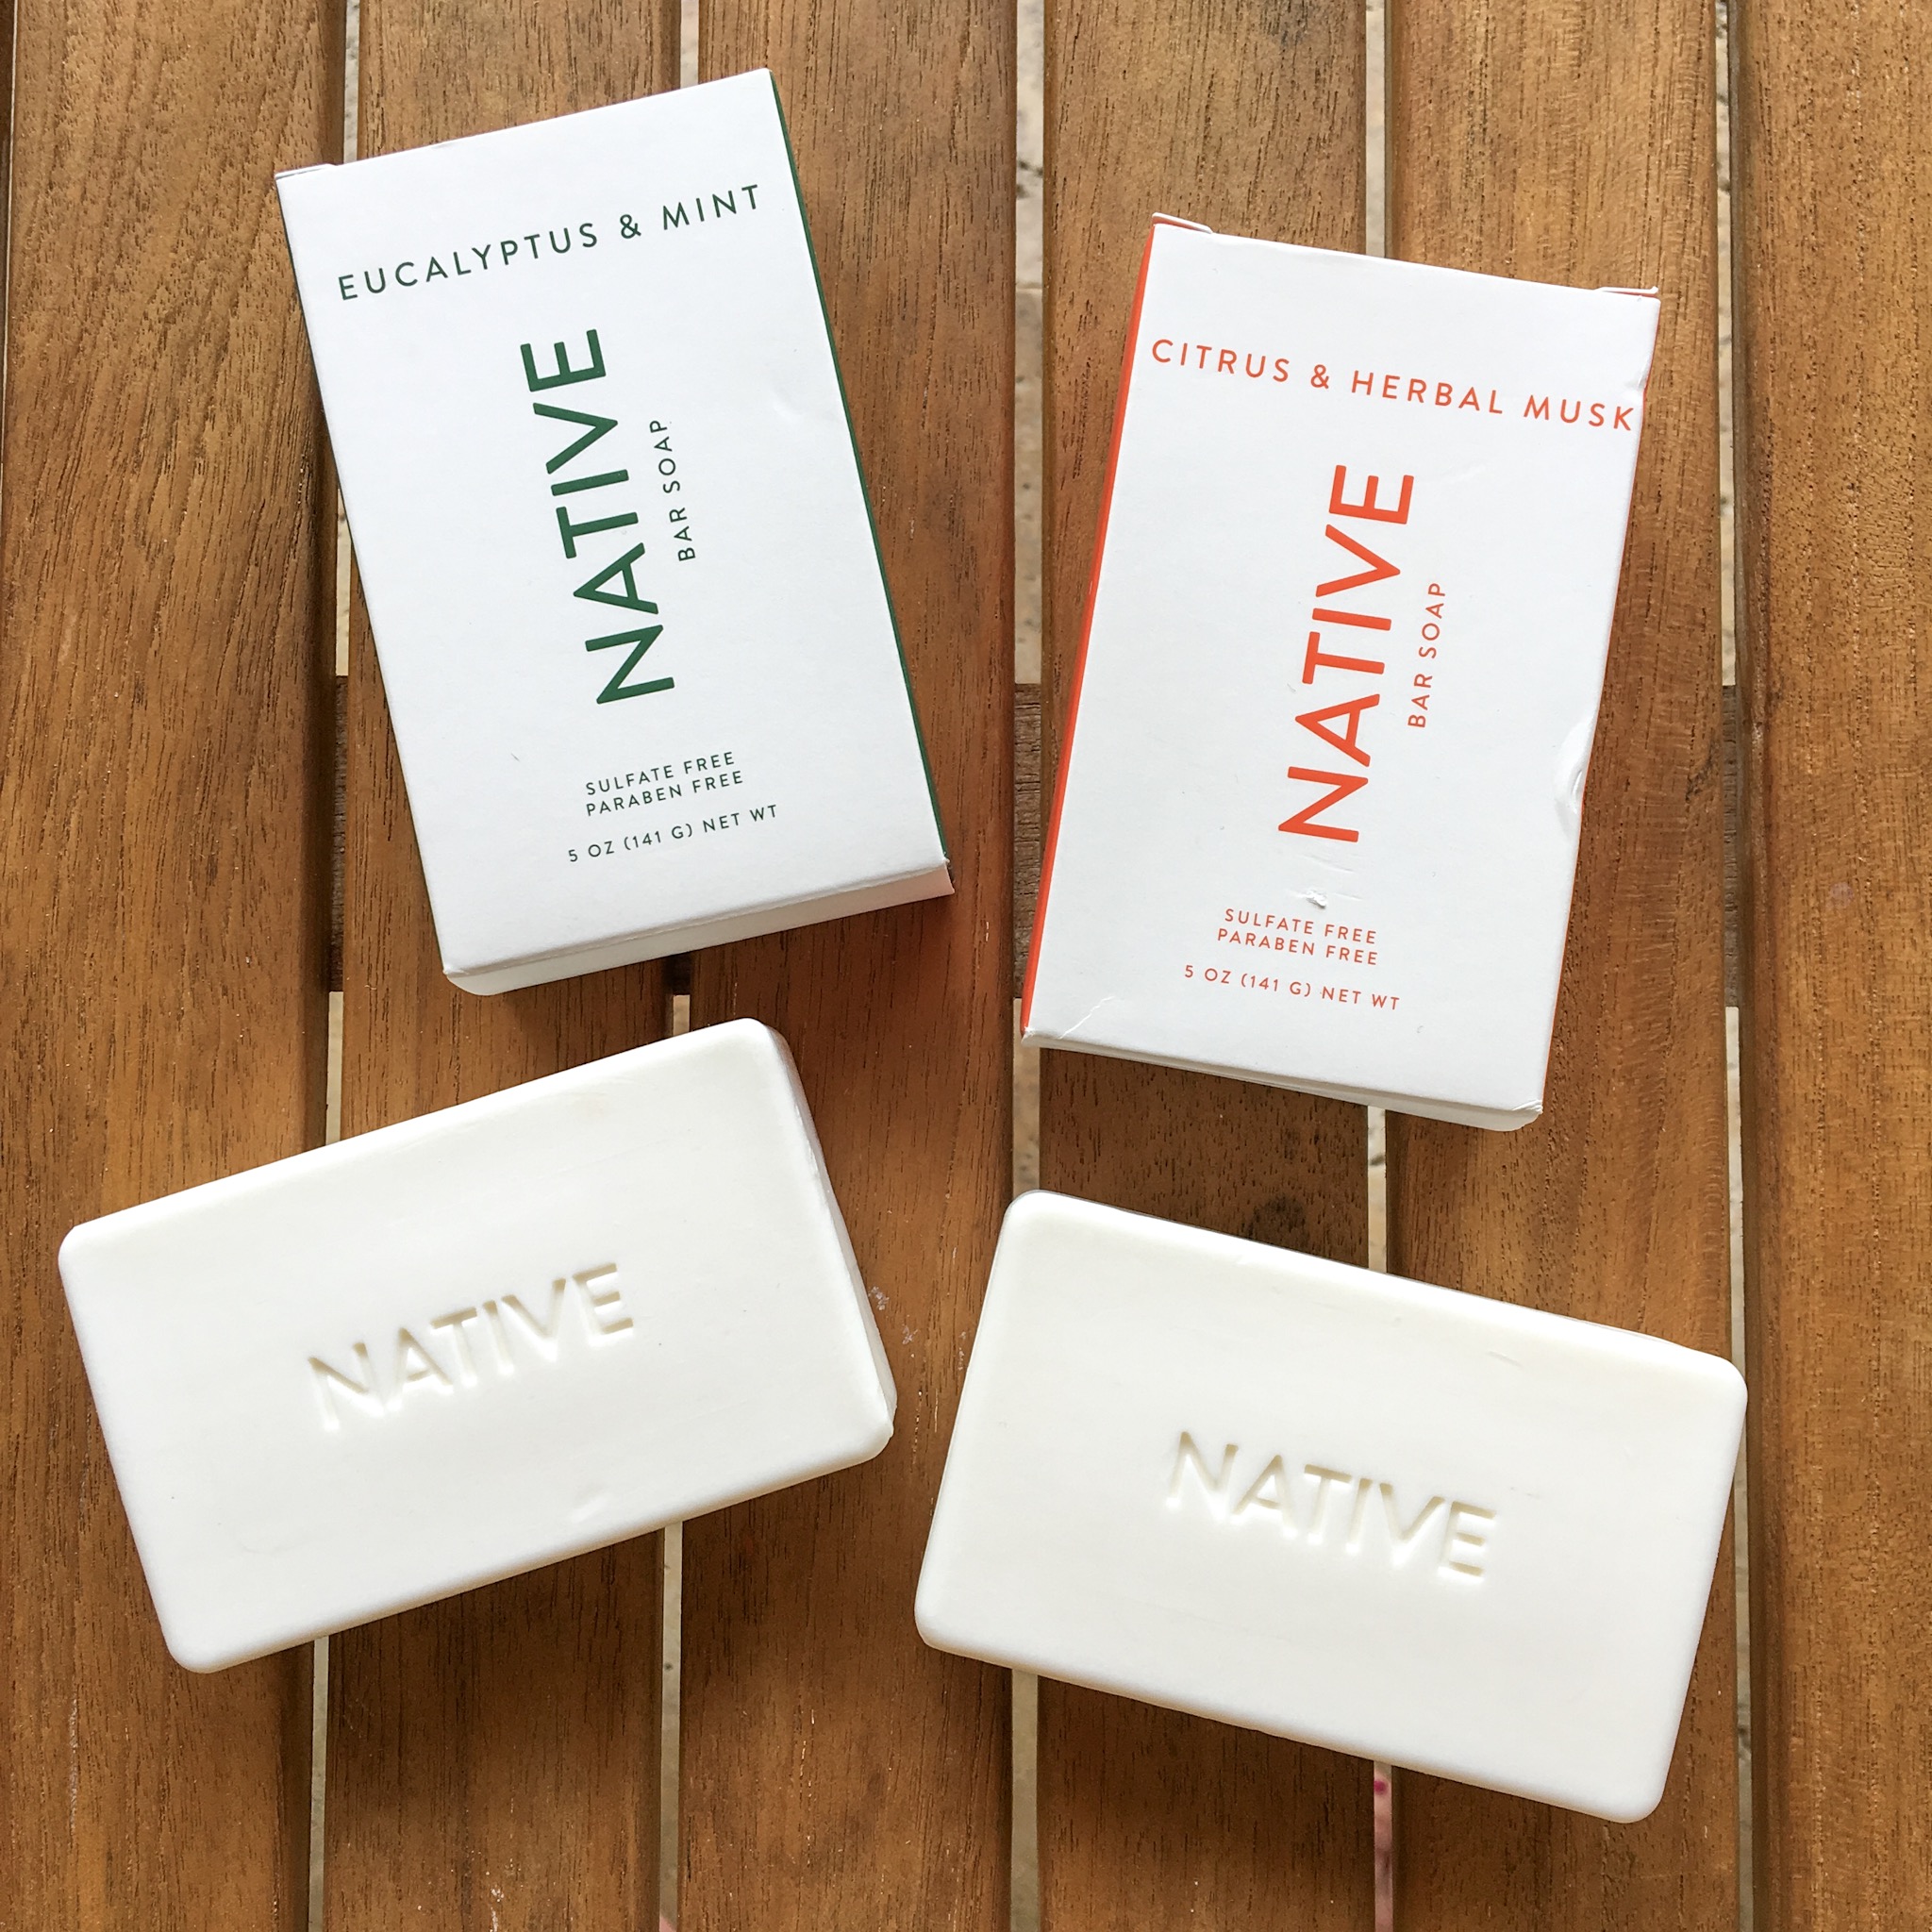 Native Bar Soap Review - A Natural Approach to Clean